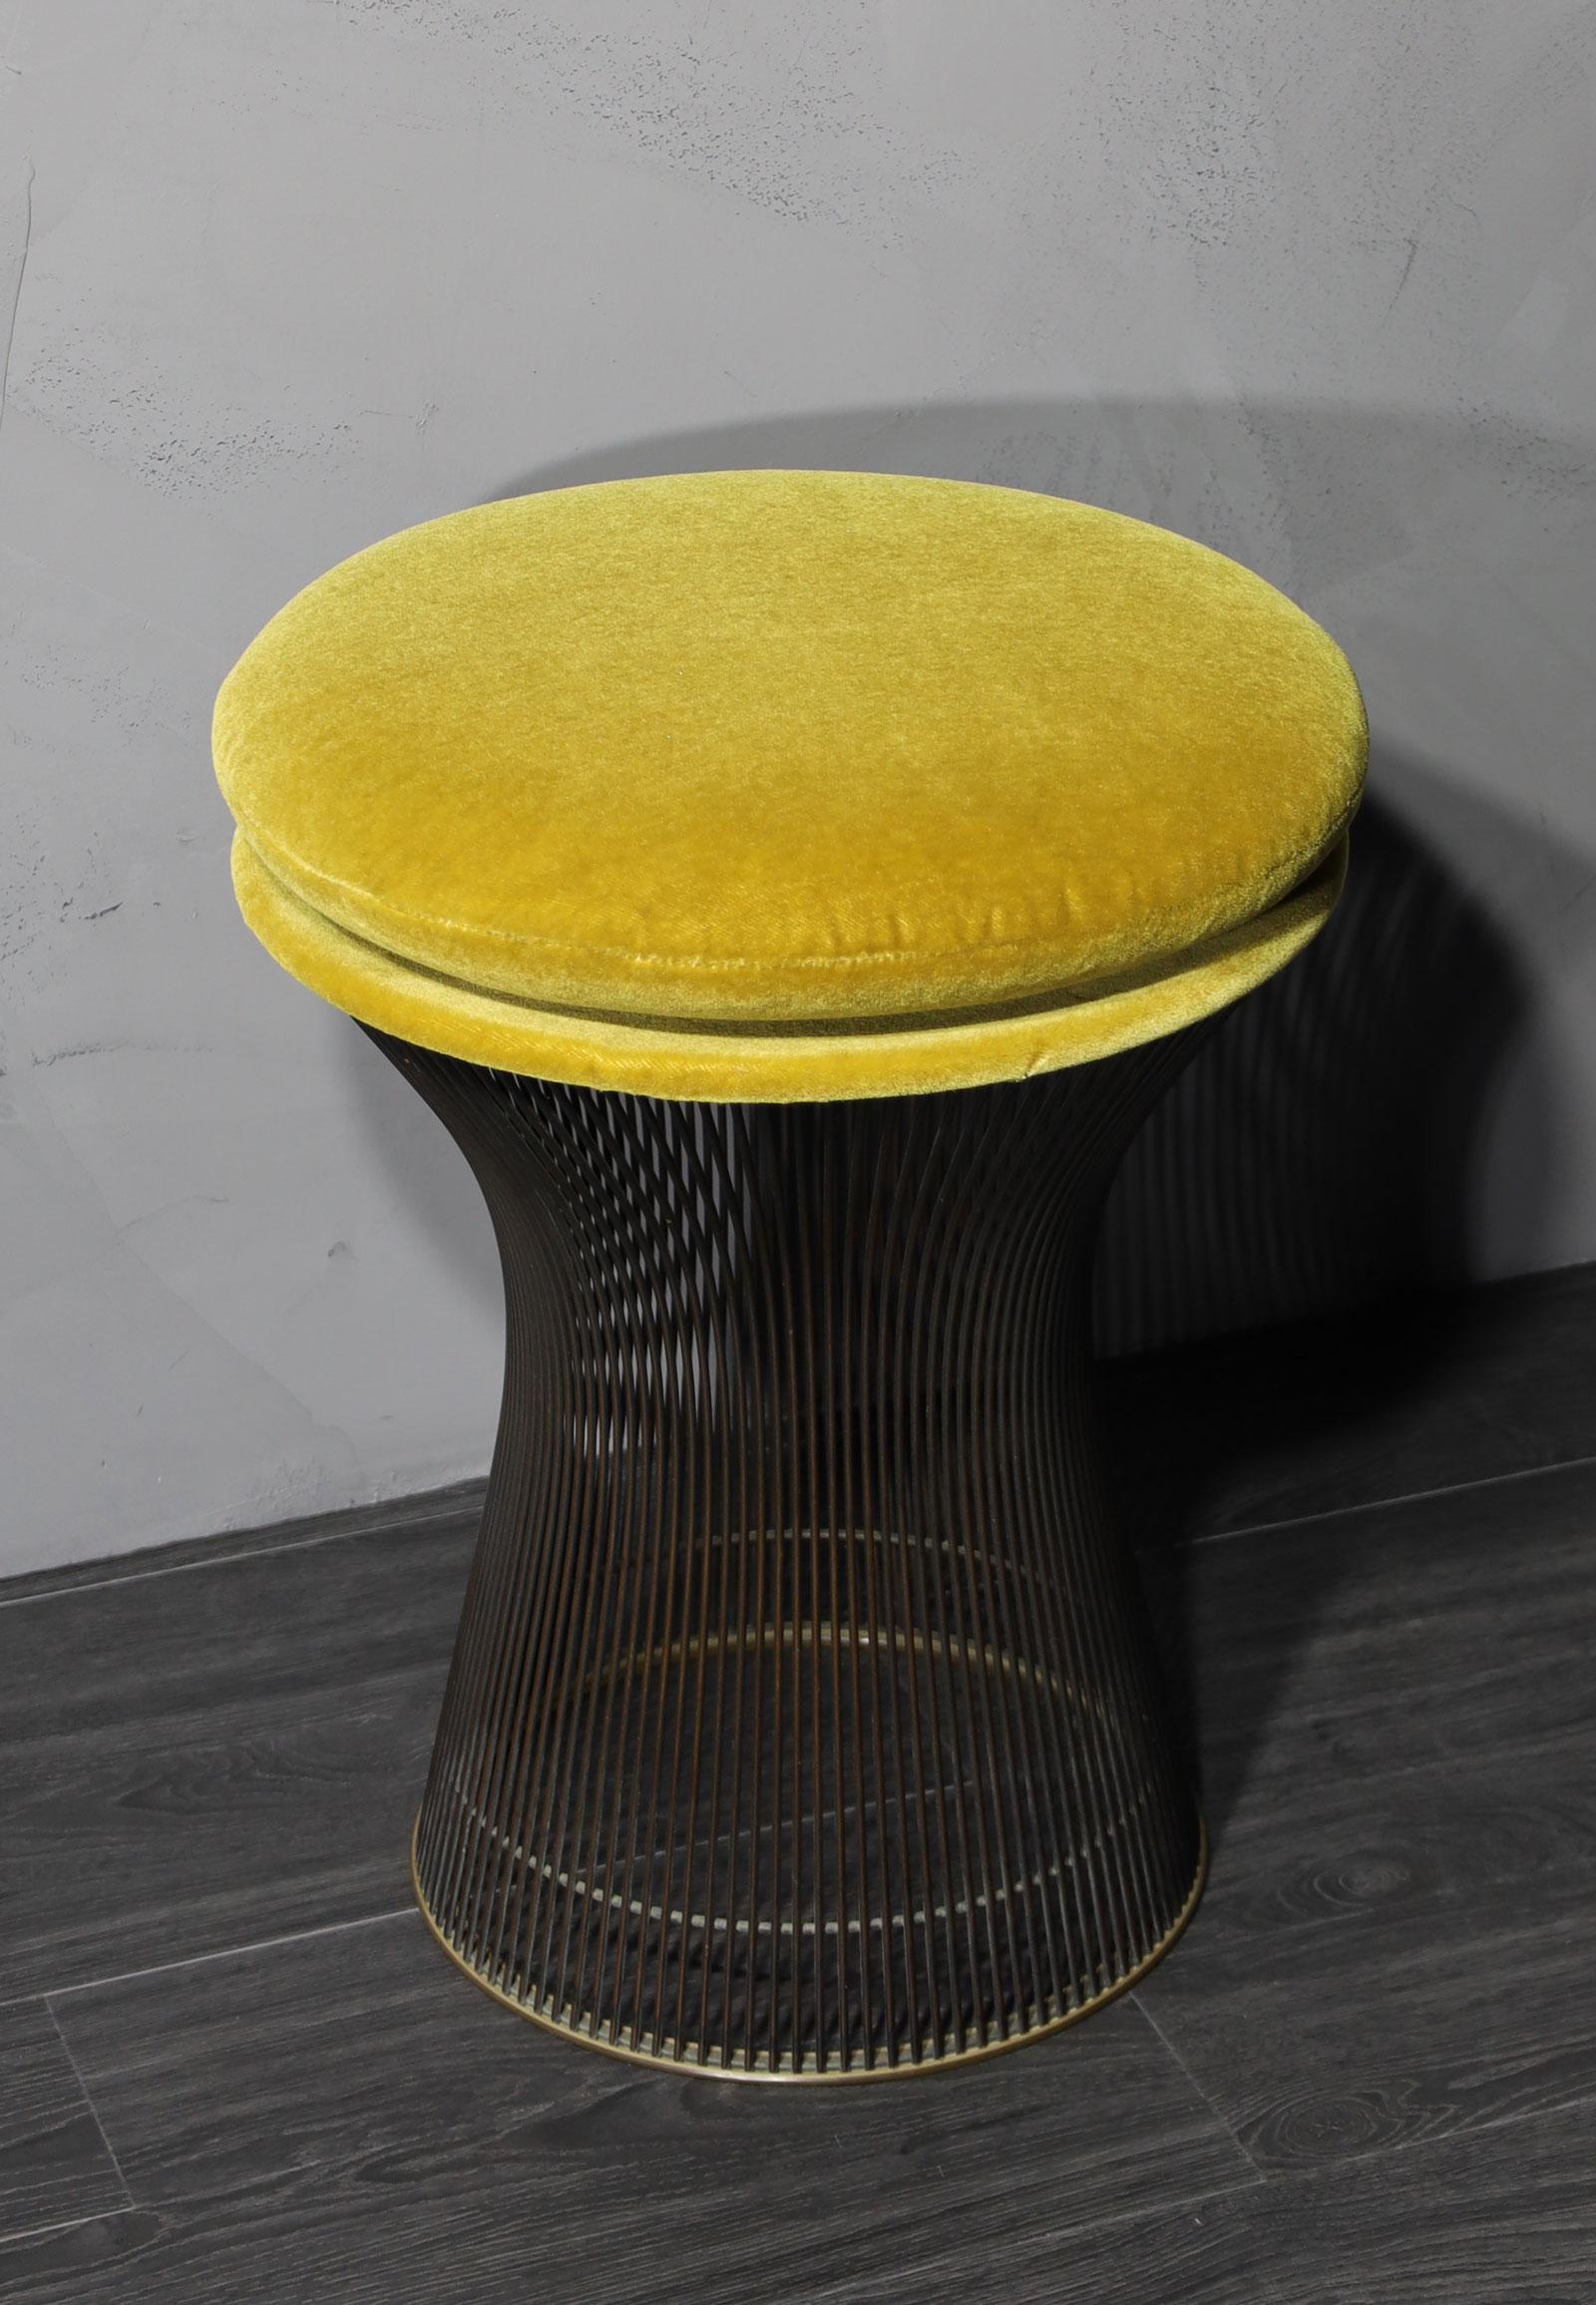 A beautiful stool designed by Warren Platner for Knoll. Stool has been reupholstered in a high quality mustard colored mohair. Stool is bronze and bears Art-Metal Knoll label.